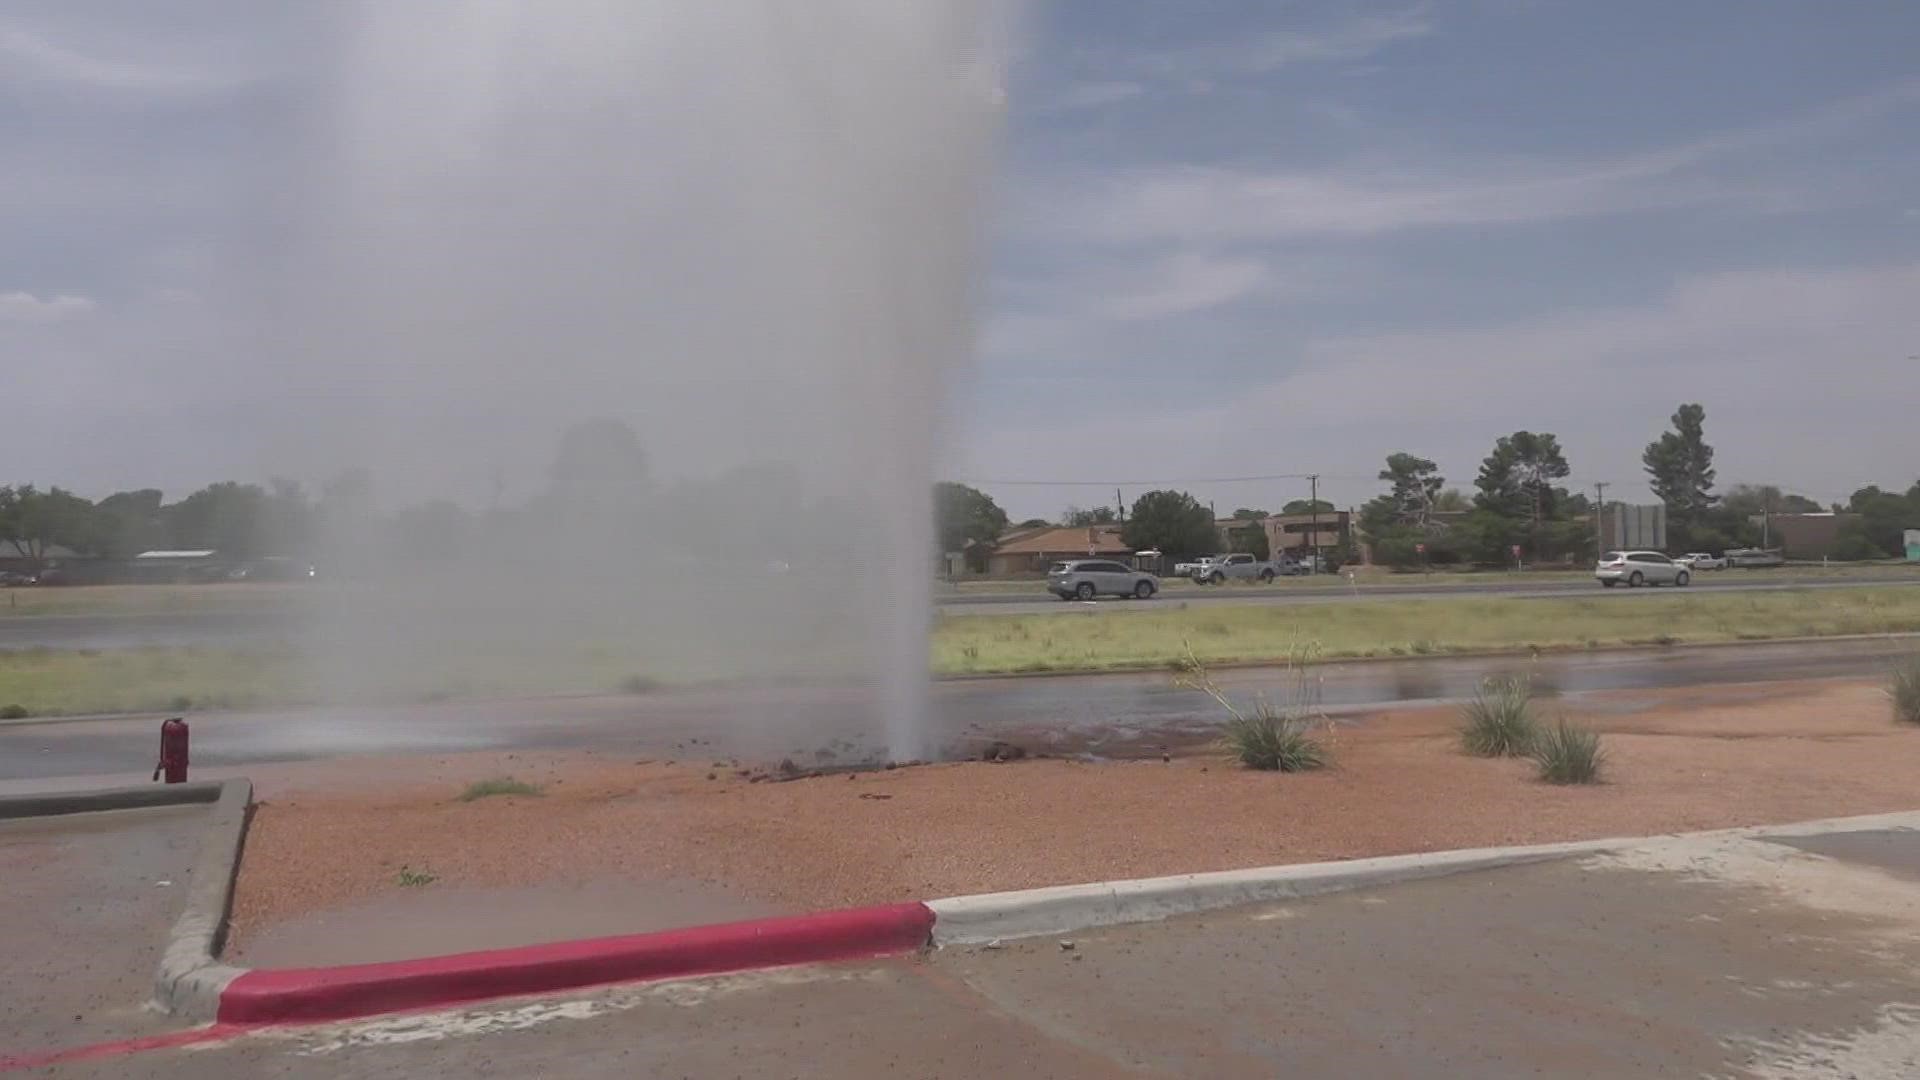 Water and pressure caused a large hole in the ground leading to water spewing into the air.